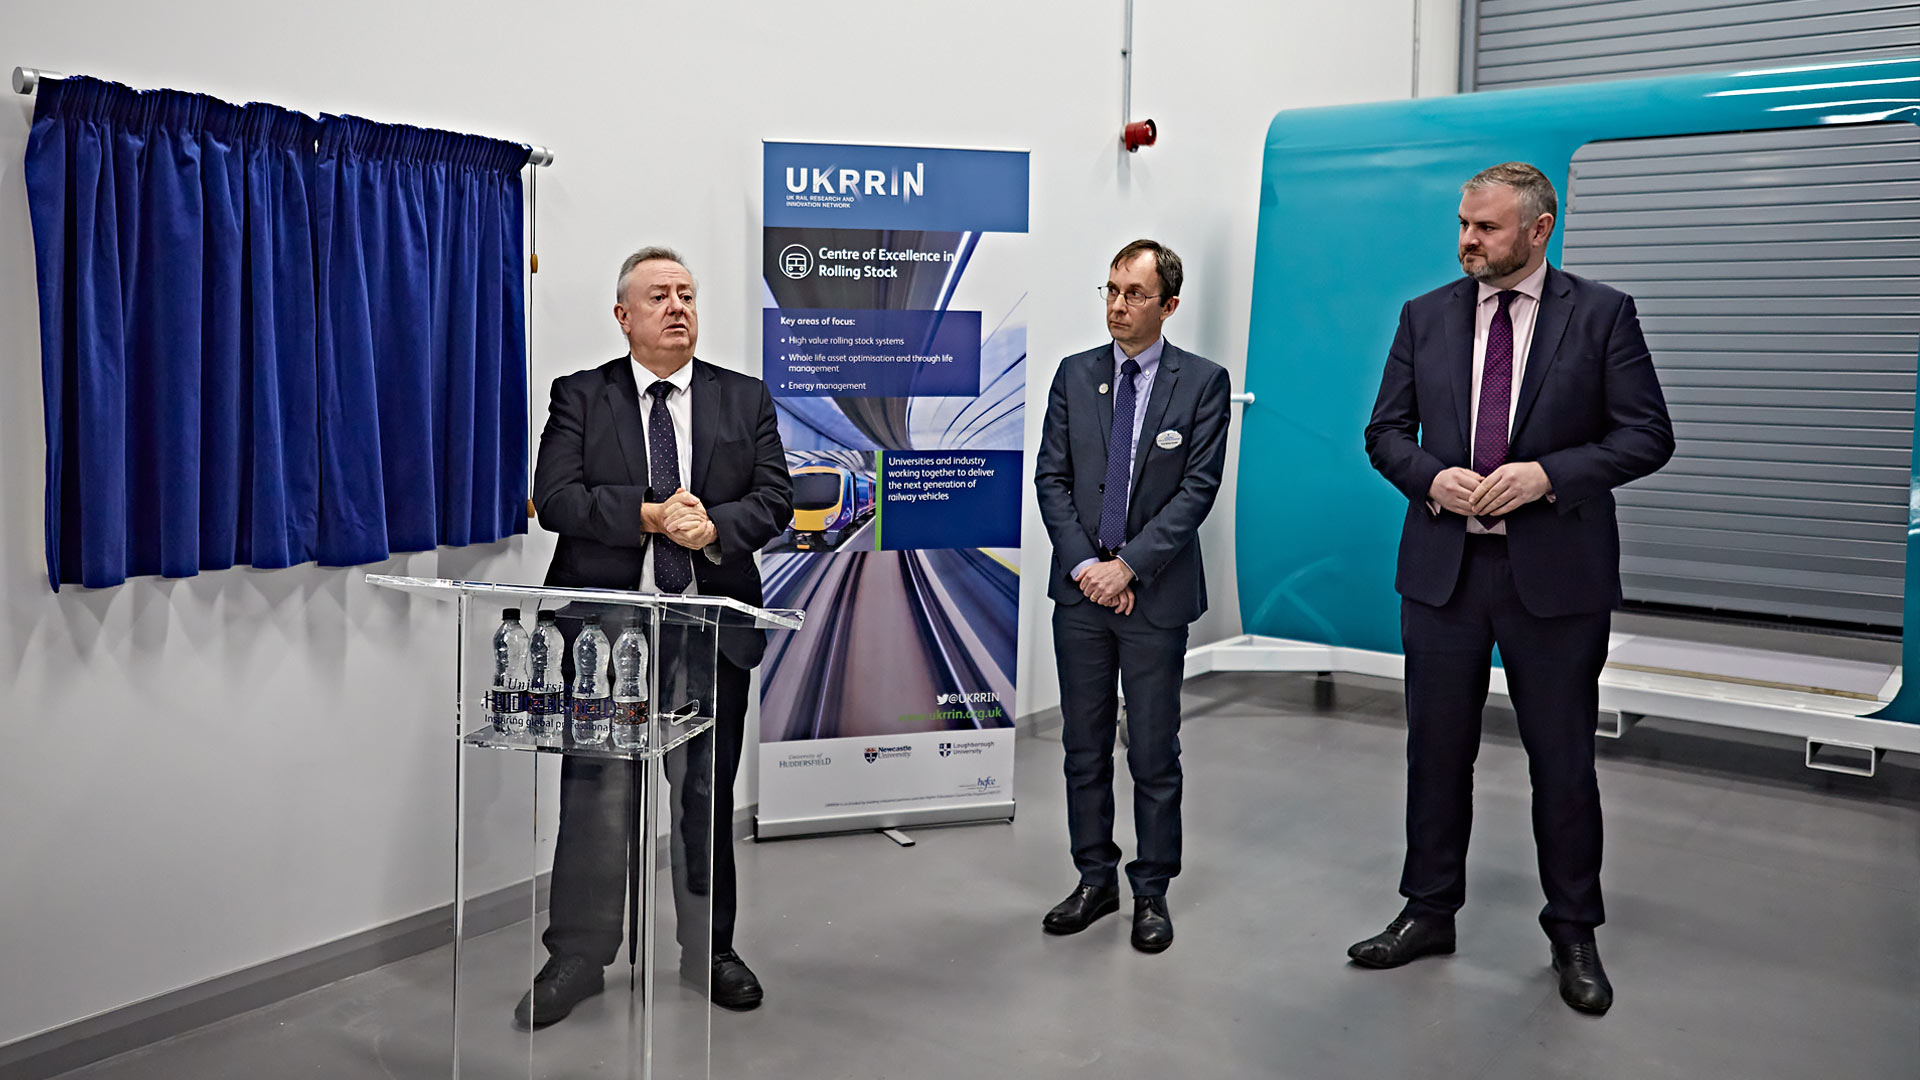 Andrew Stephenson MP officially launches the new Centre of Excellence in Rolling Stock at the University of Huddersfield